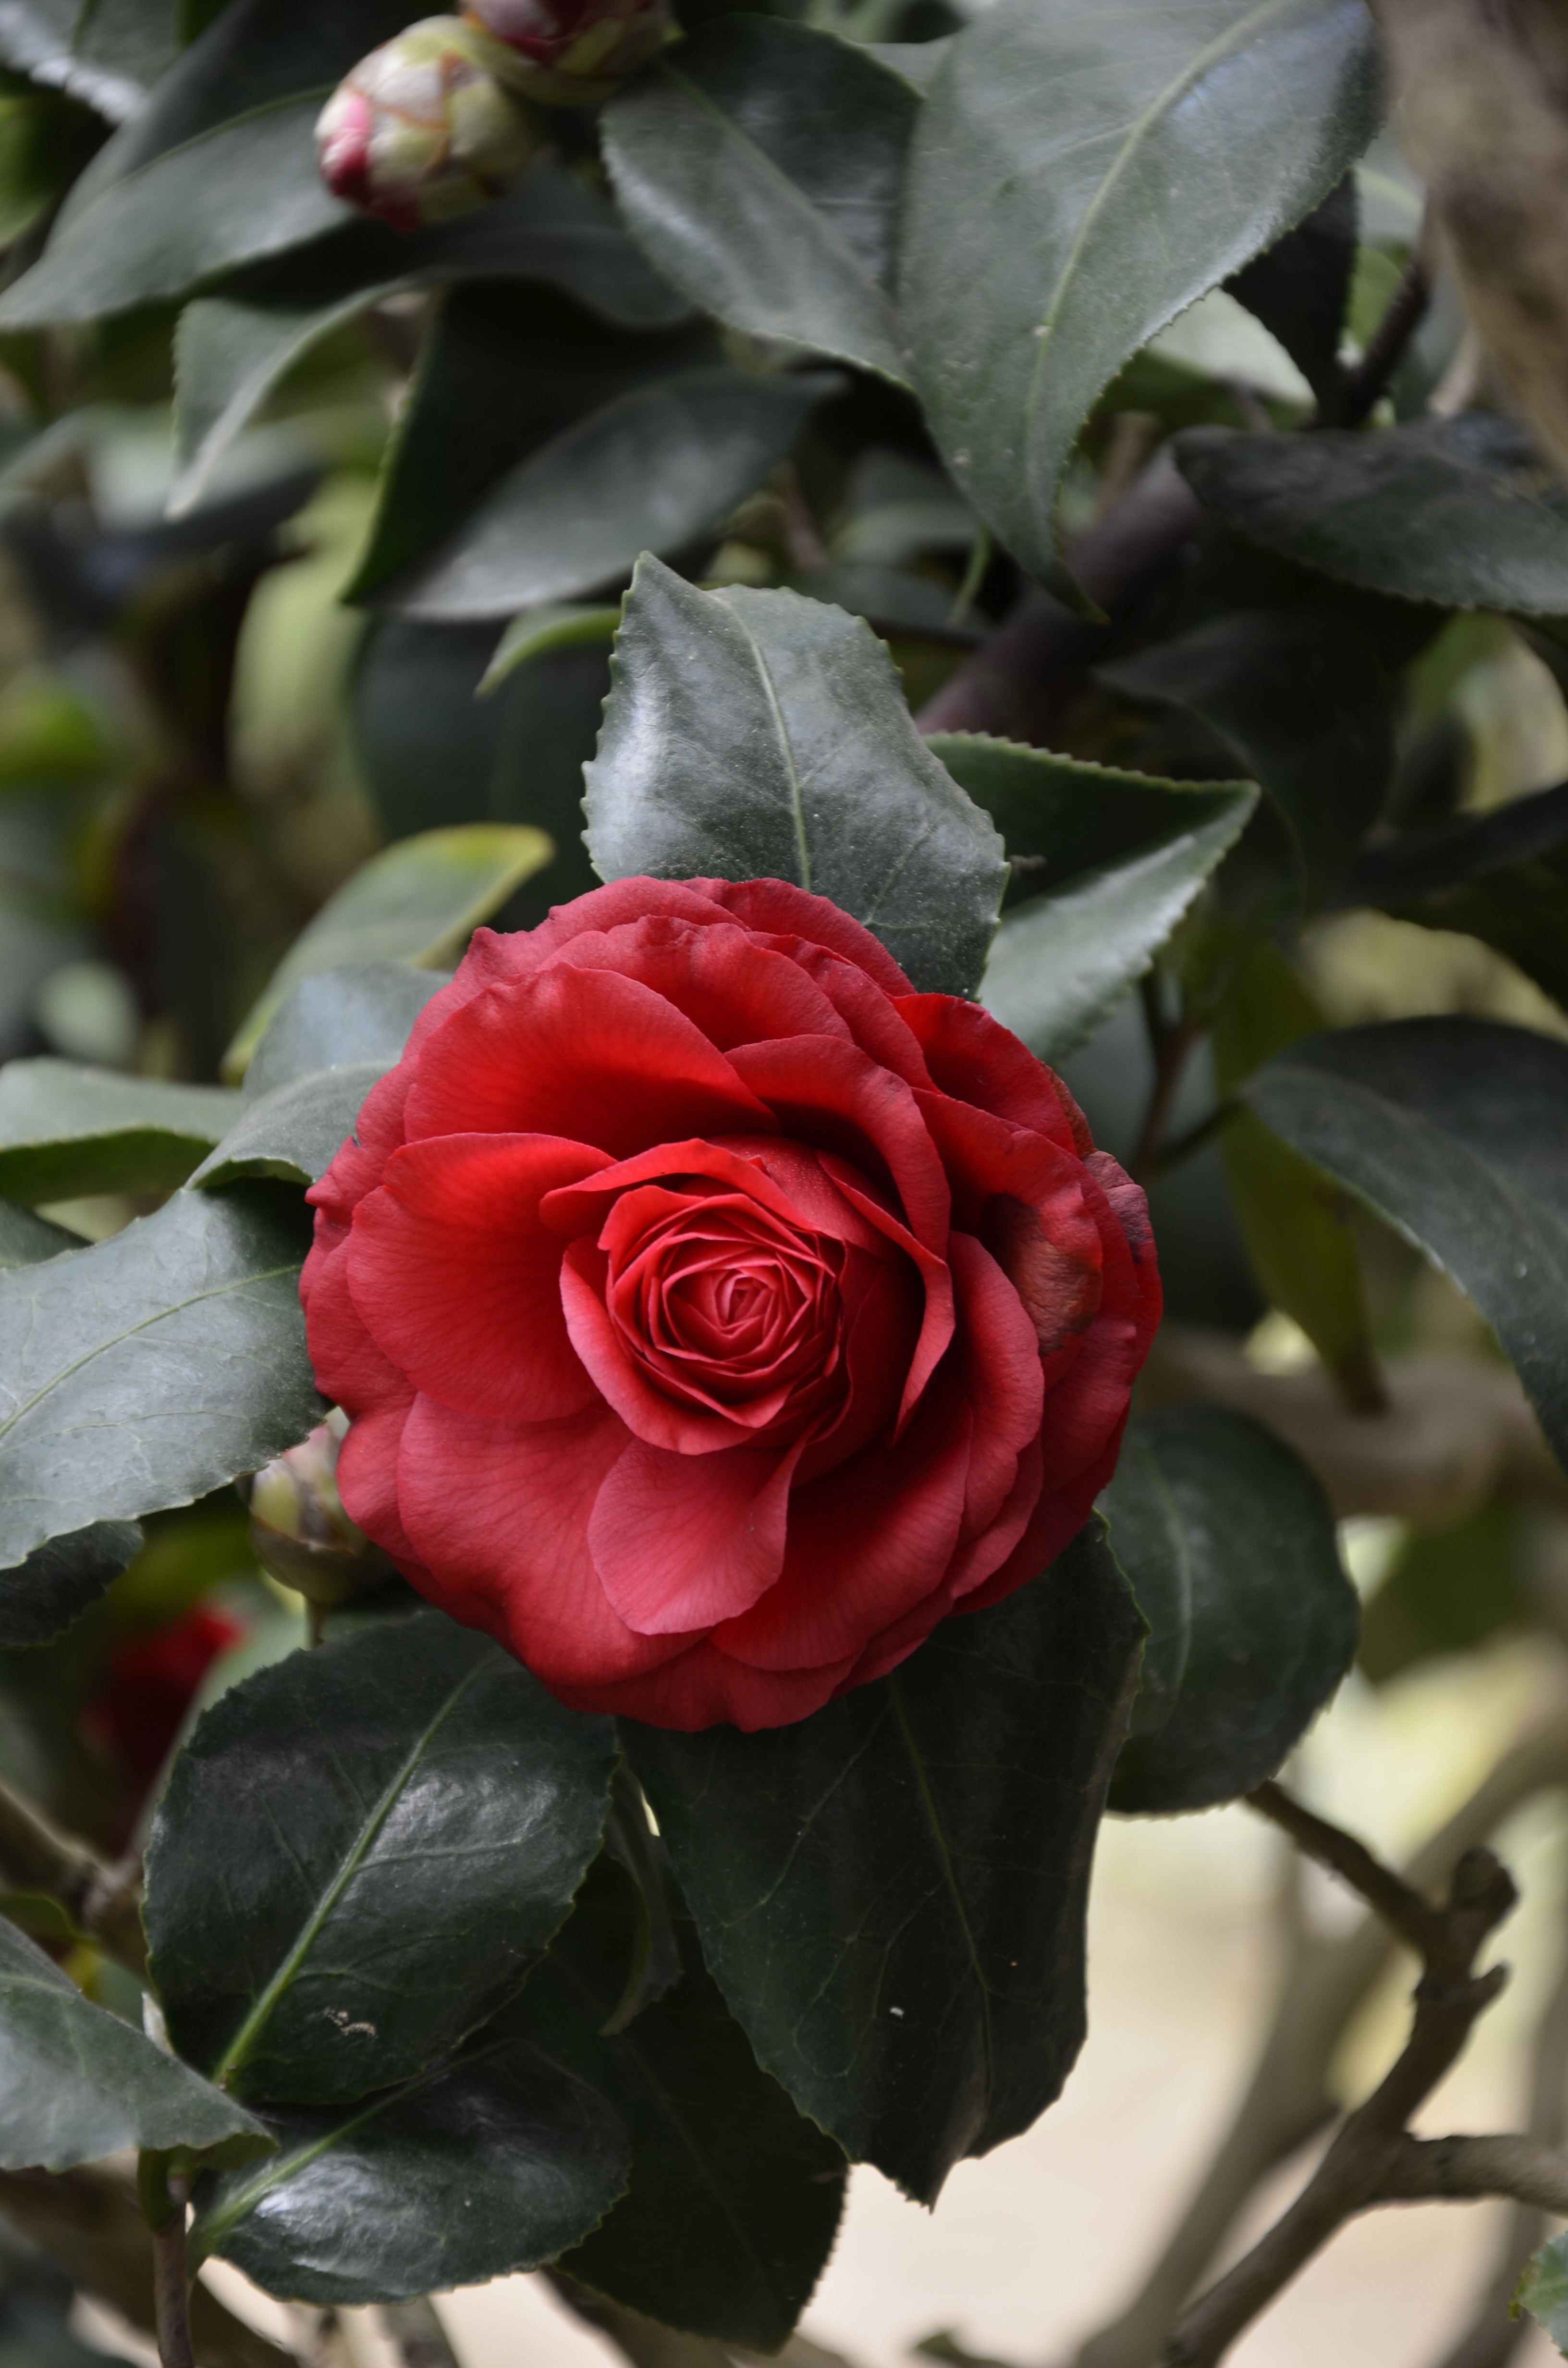 red rose with green leaves